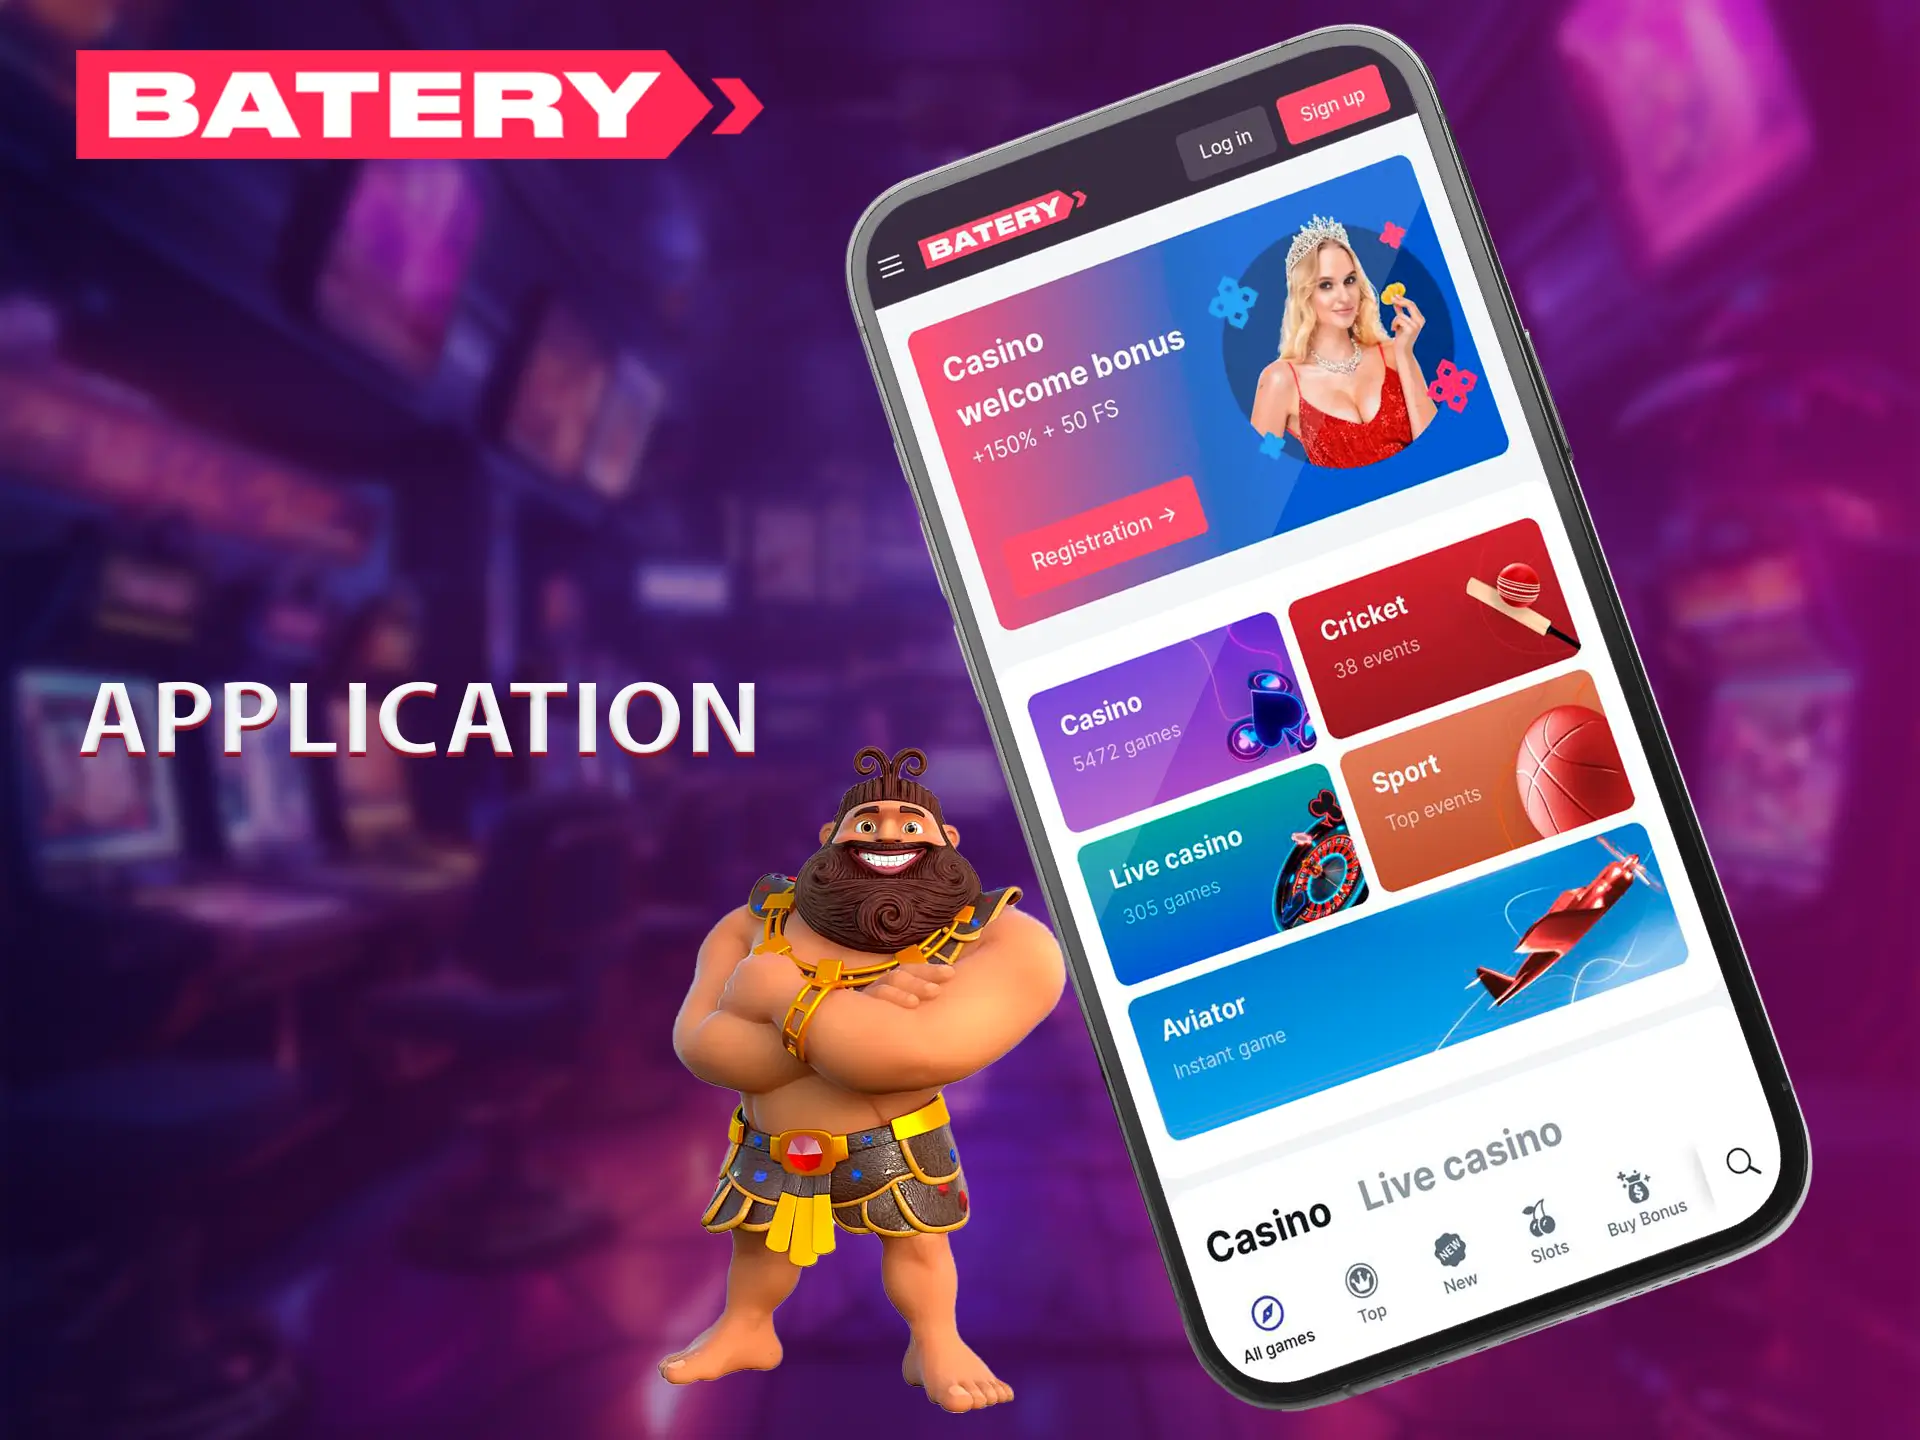 The Batery app gives out excellent performance and will effortlessly run your favorite games from anywhere in the world.